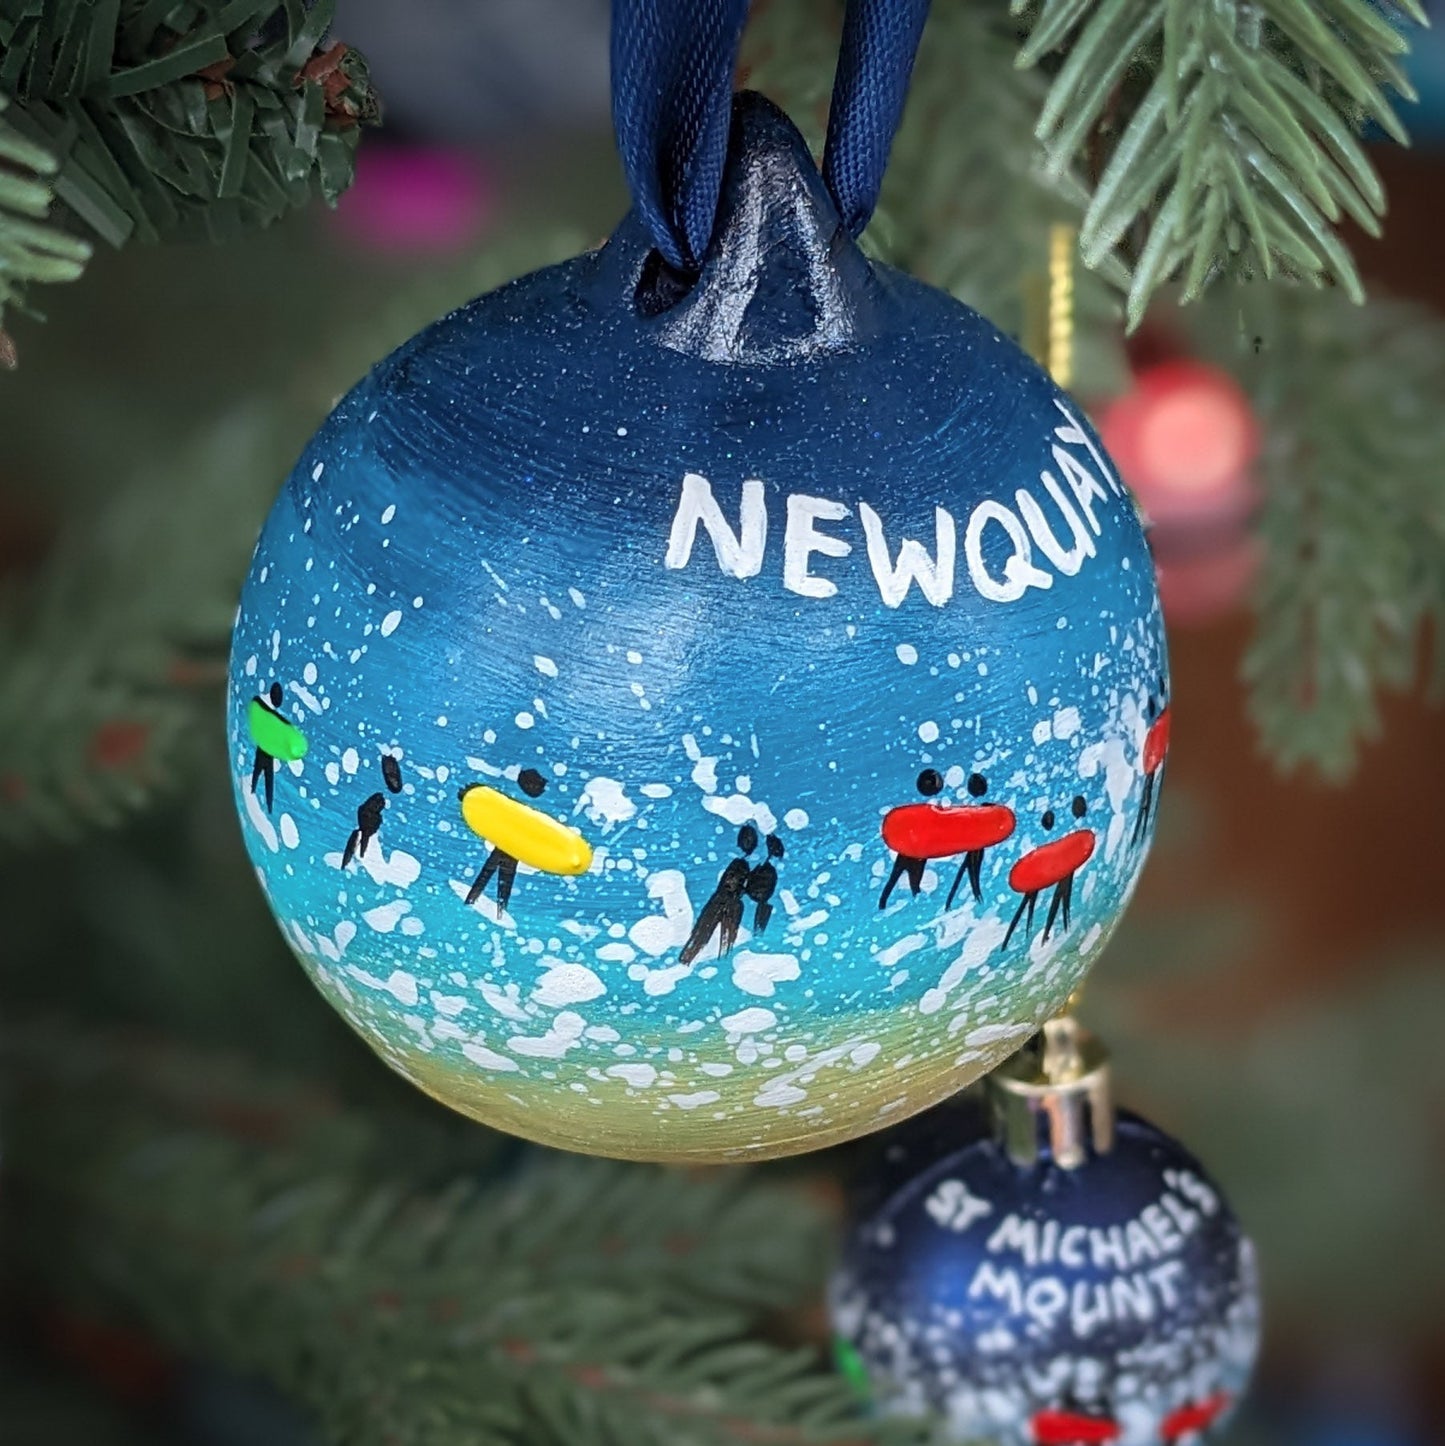 Hand Painted Ceramic Bauble - Newquay